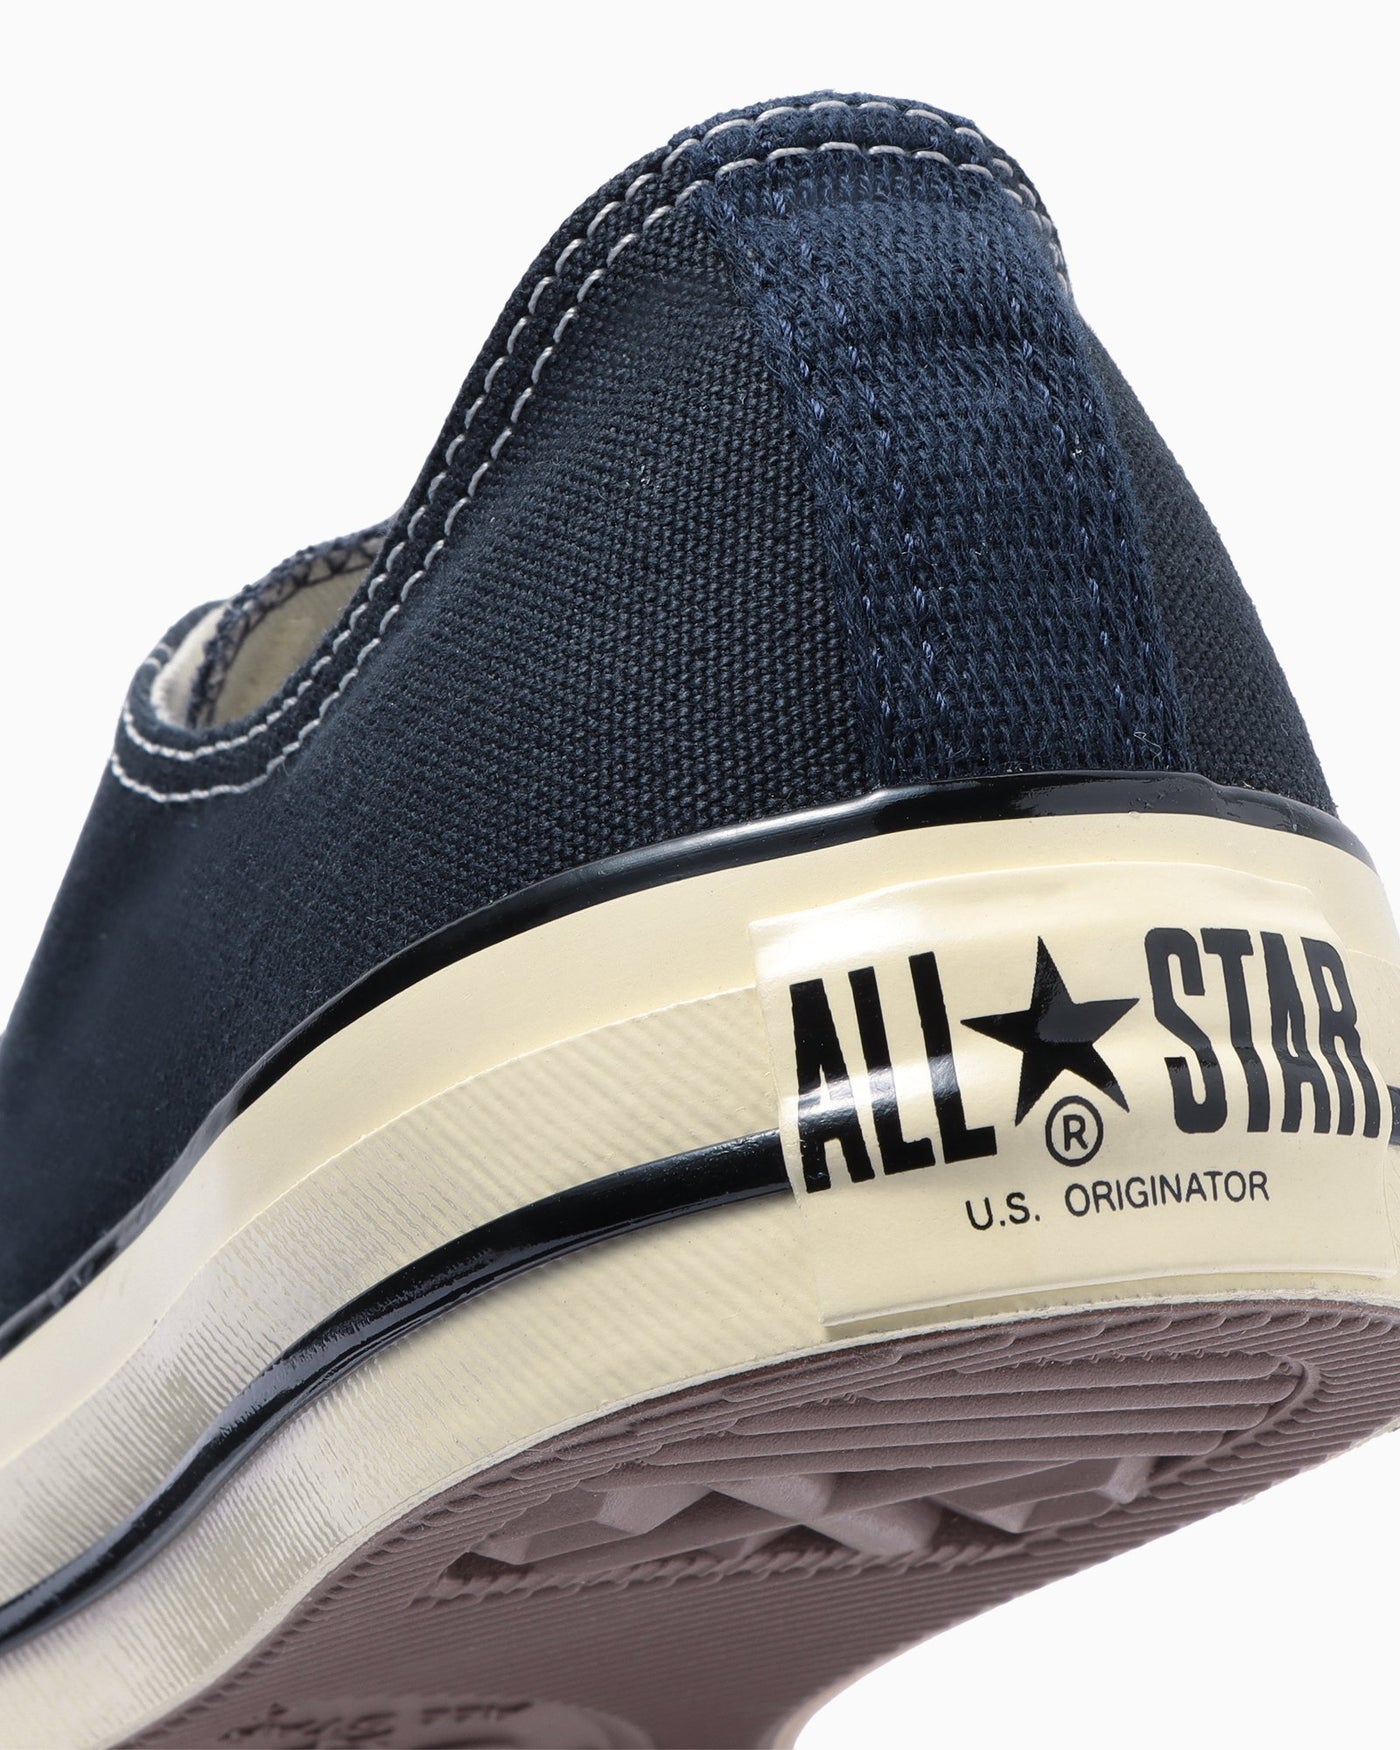 ALL STAR US AGEDCOLORS OX